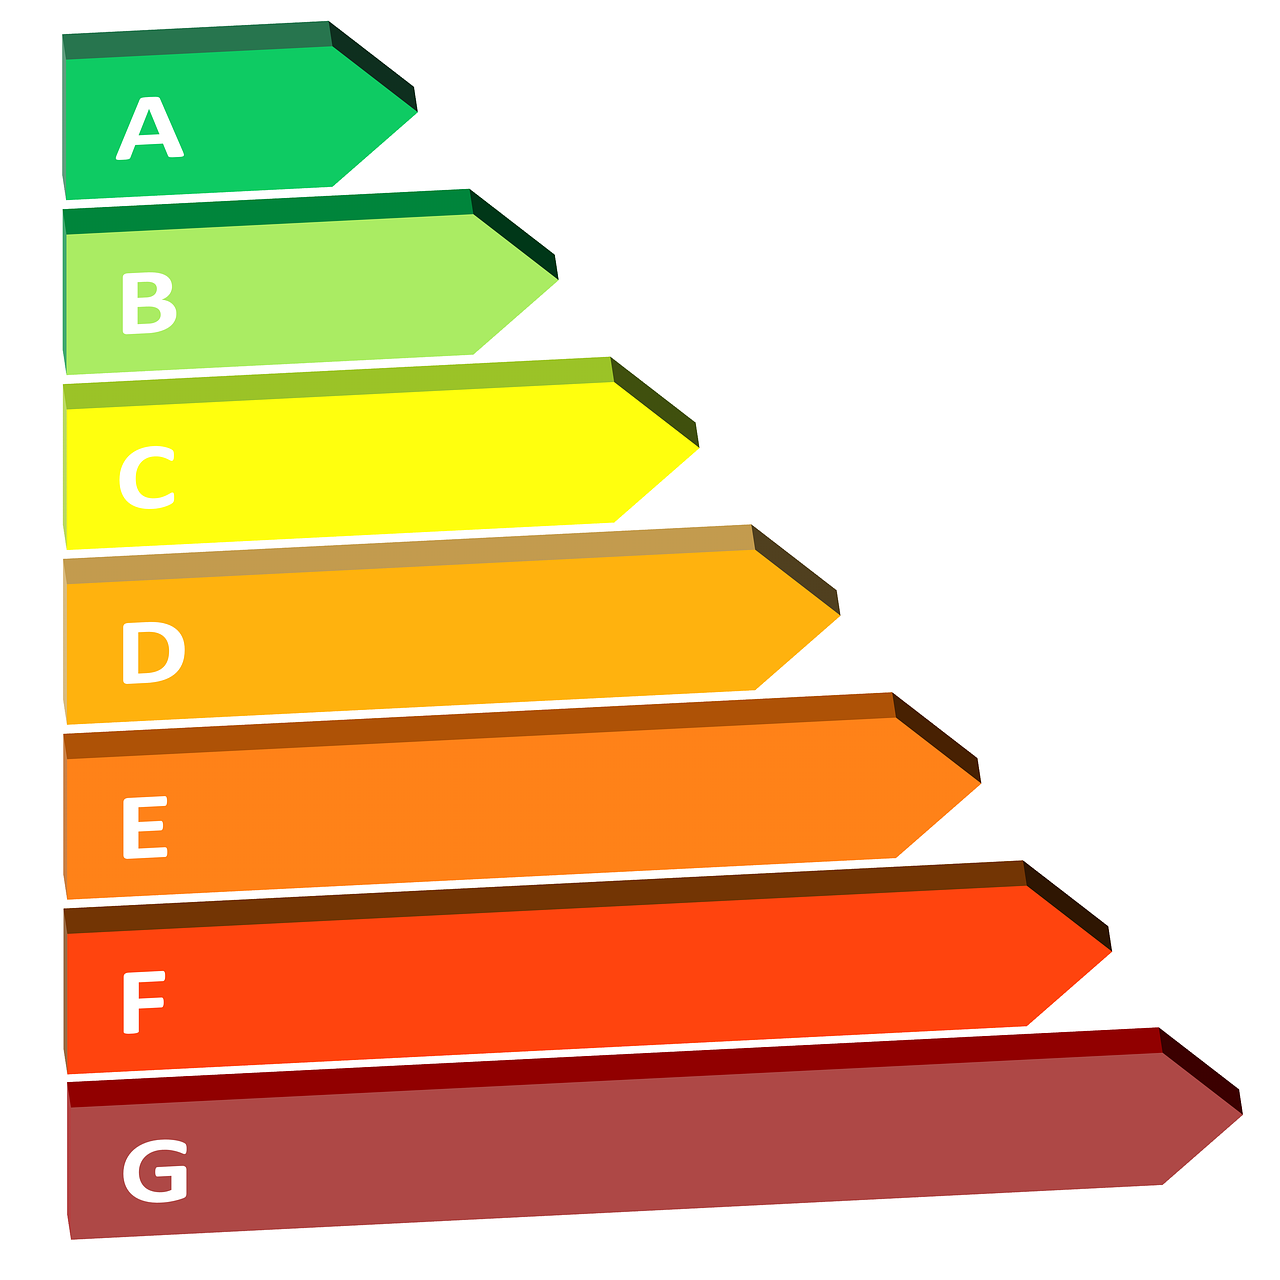 An energy efficiency chart with different colors for EPC purposes.